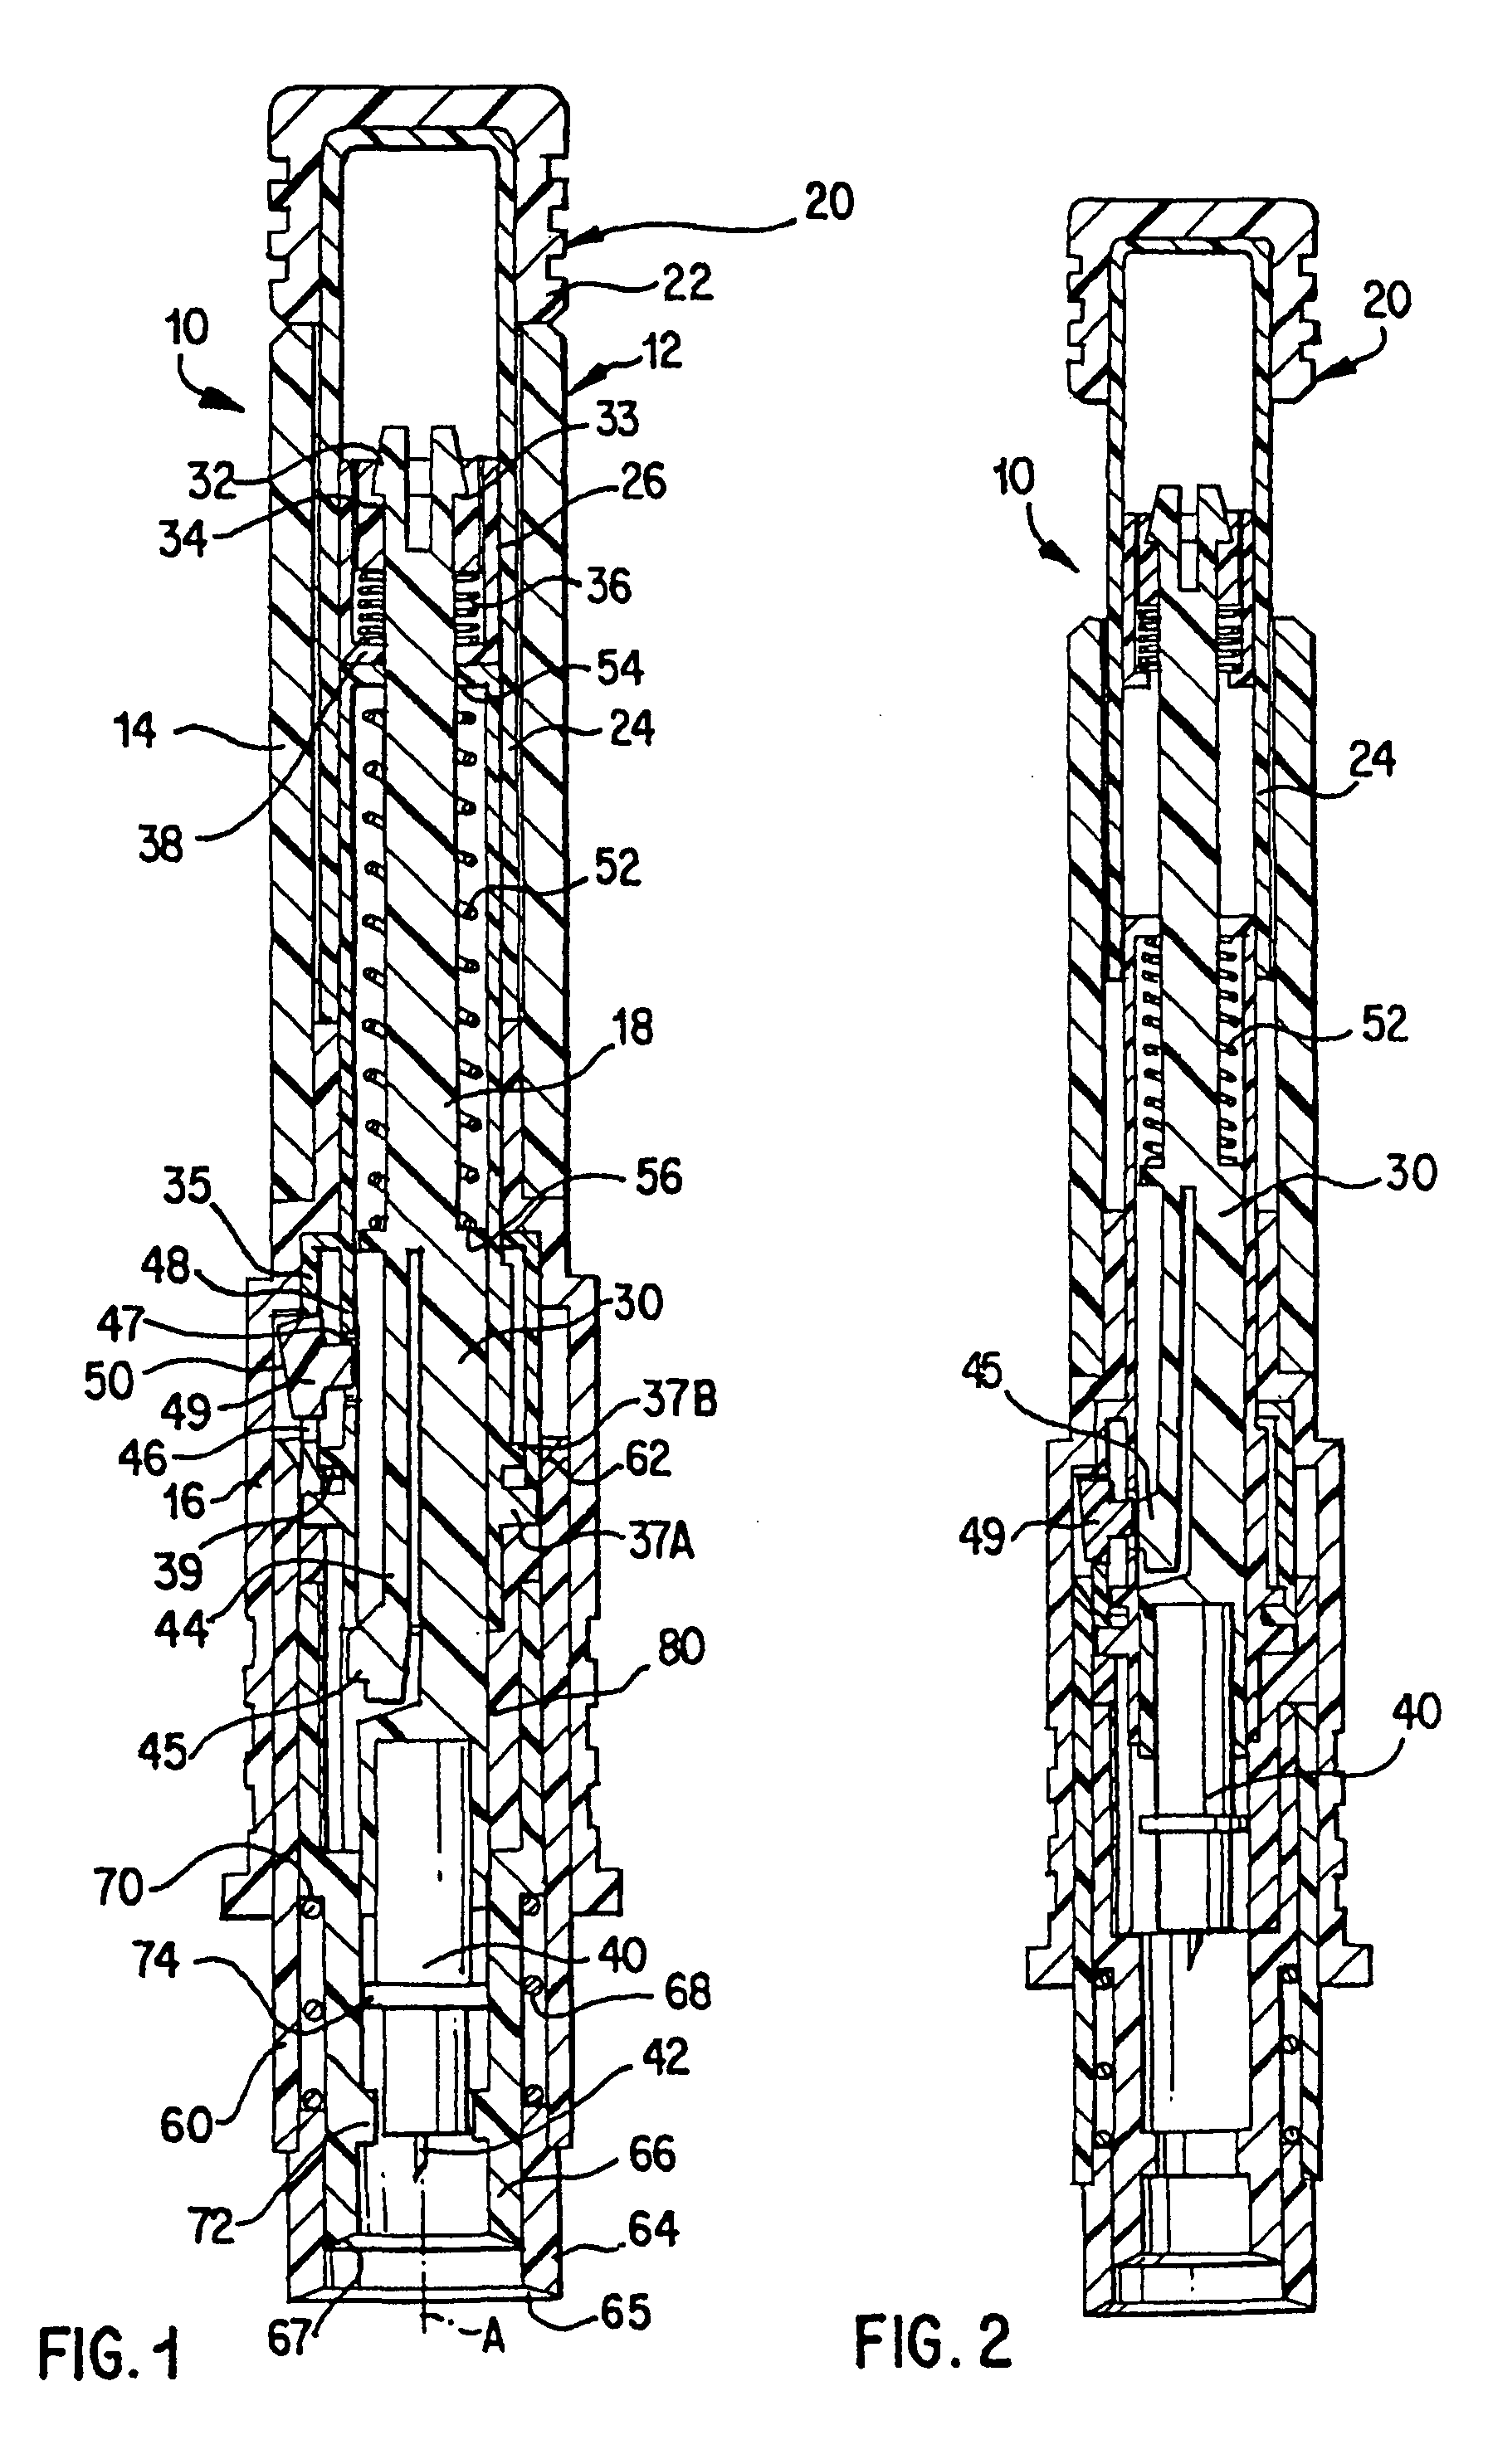 Methods and apparatus for expressing body fluid from an incision